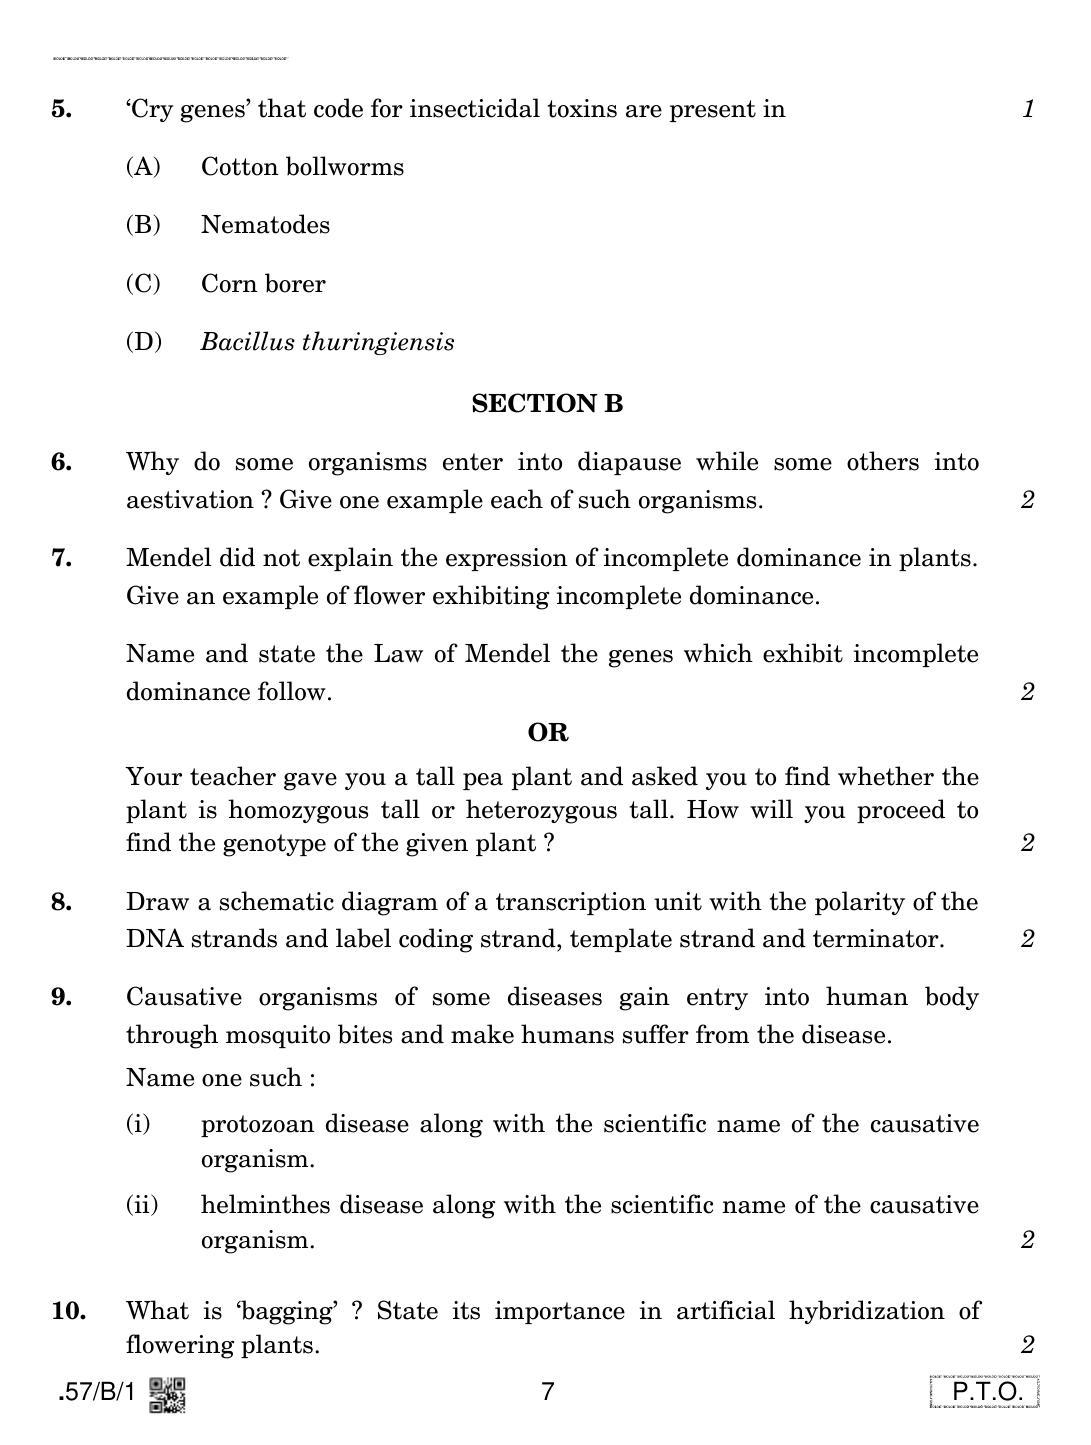 CBSE Class 12 57-C-1 - Biology 2020 Compartment Question Paper - Page 7